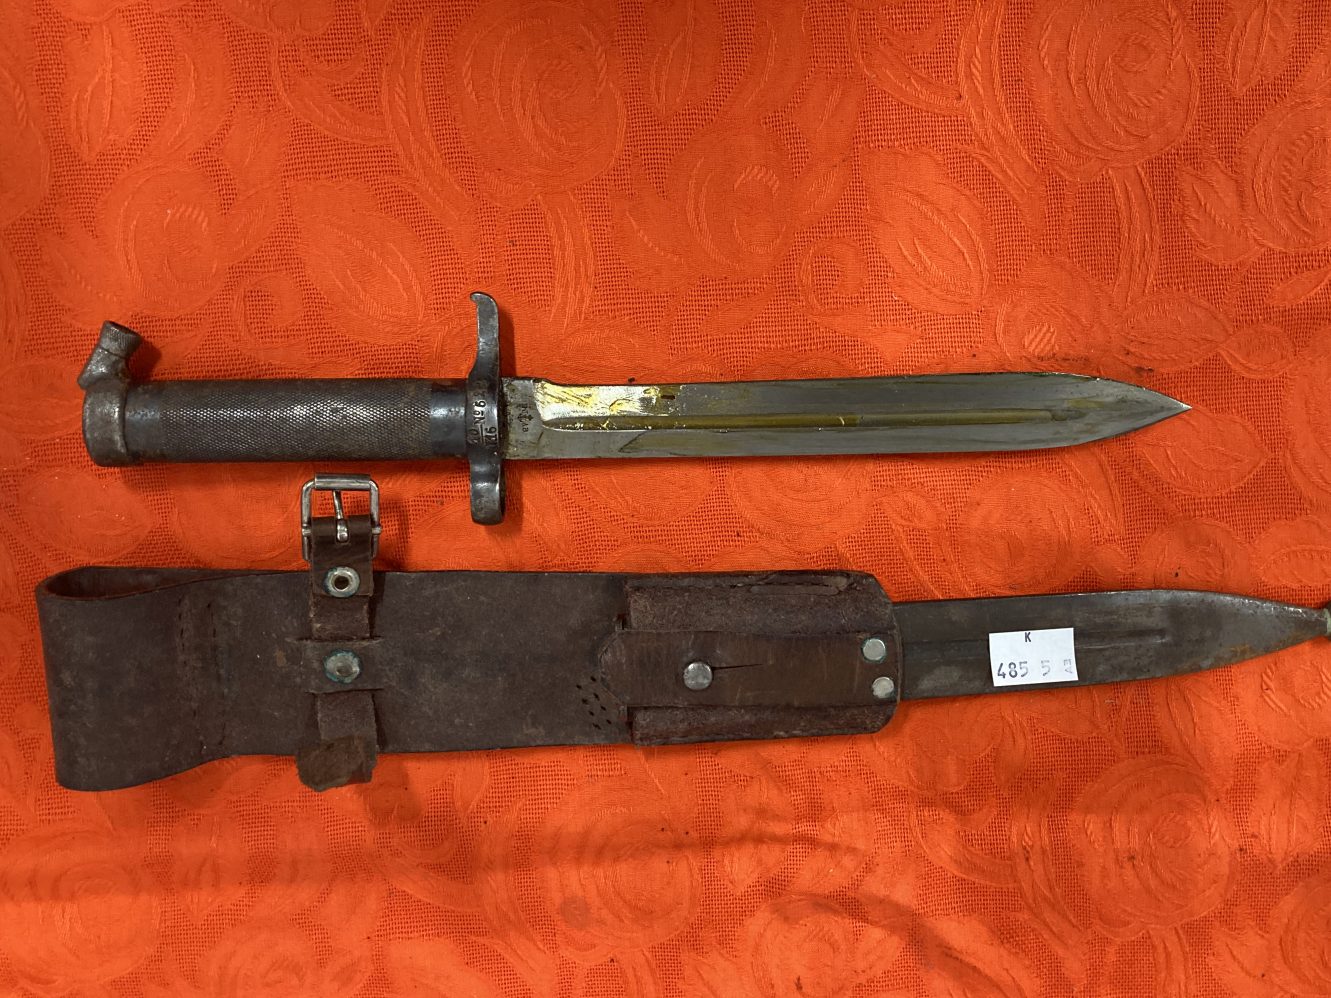 Militaria/Edged Weapons: US M7 bayonet in an M8 scabbard. Plus a Swedish Mauser bayonet. - Image 5 of 7